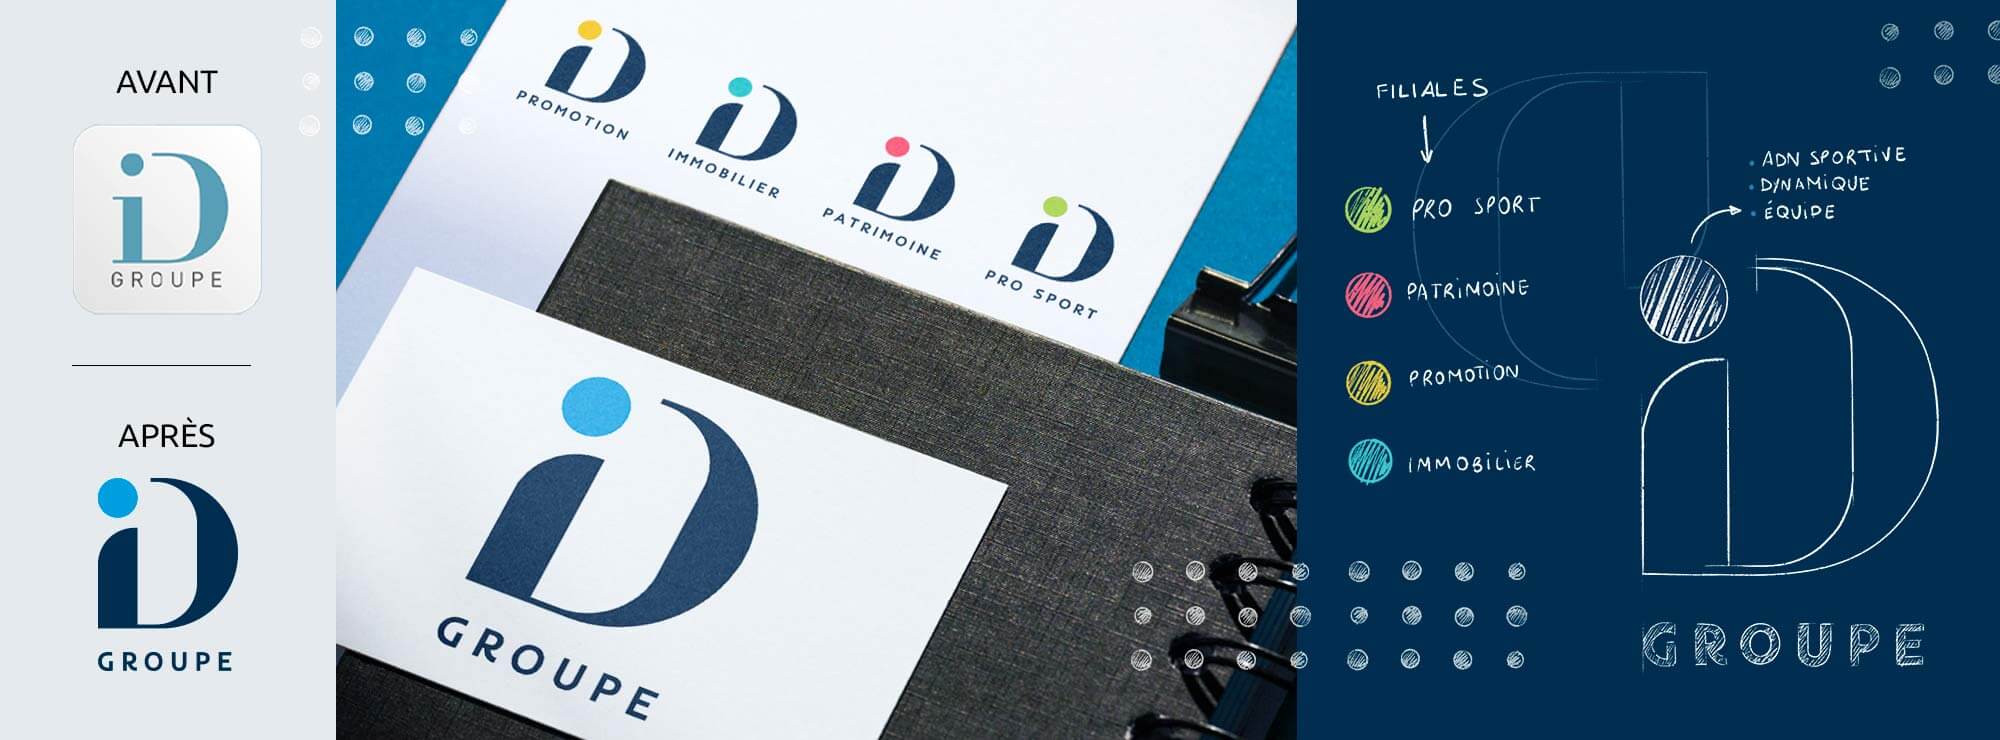 01 groupeid consulting visual identity logo illustration notebook before after.jpg